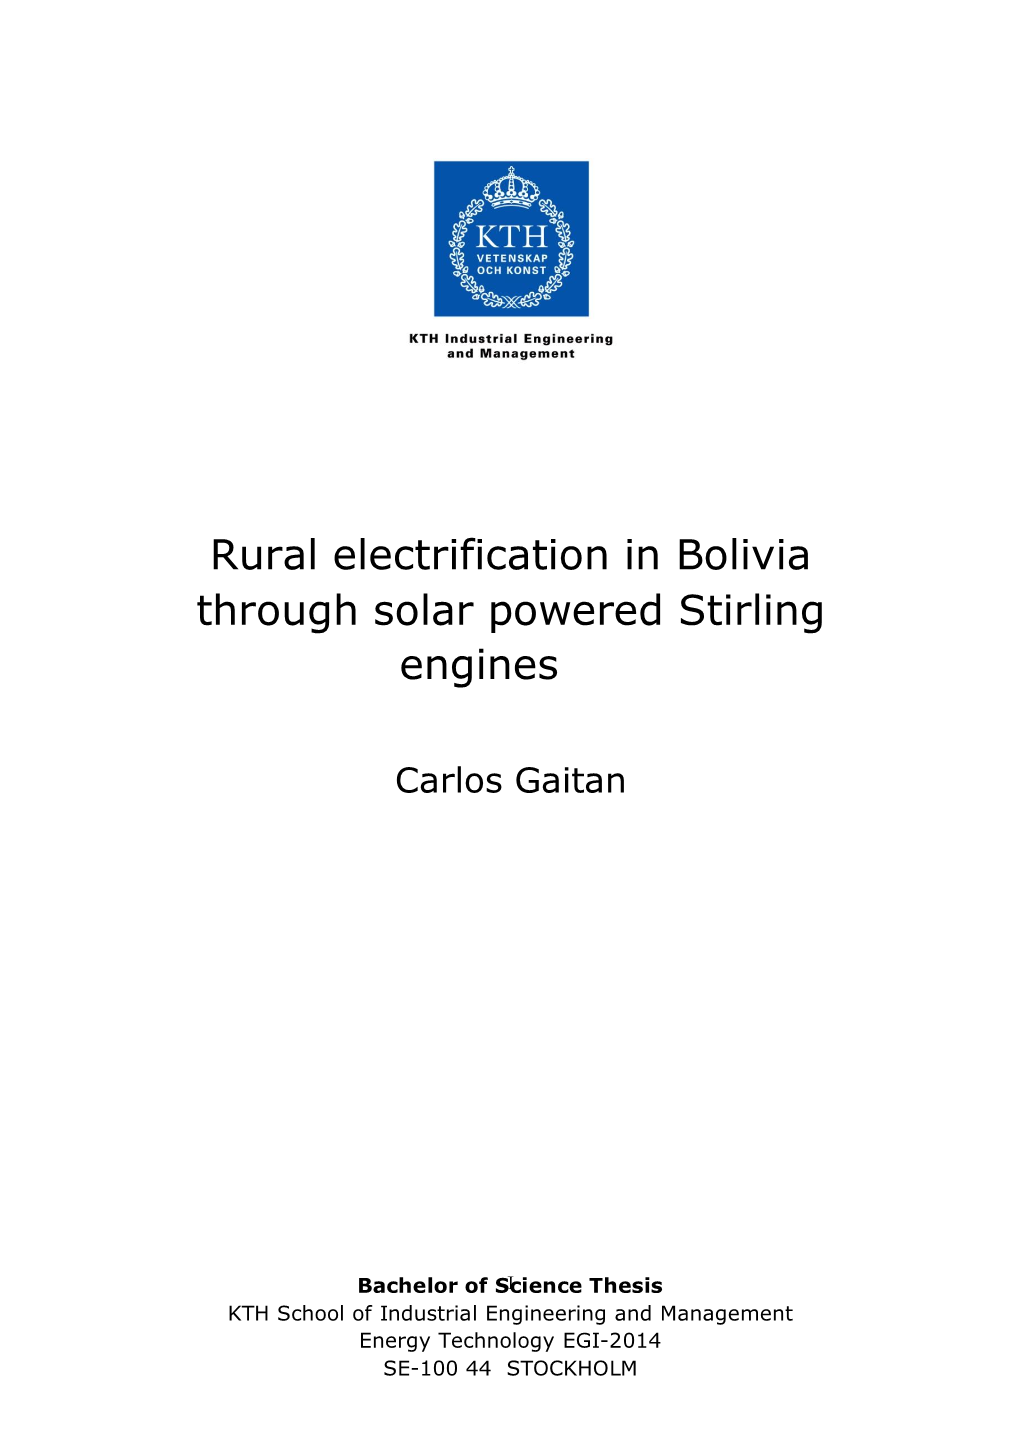 Rural Electrification in Bolivia Through Solar Powered Stirling Engines